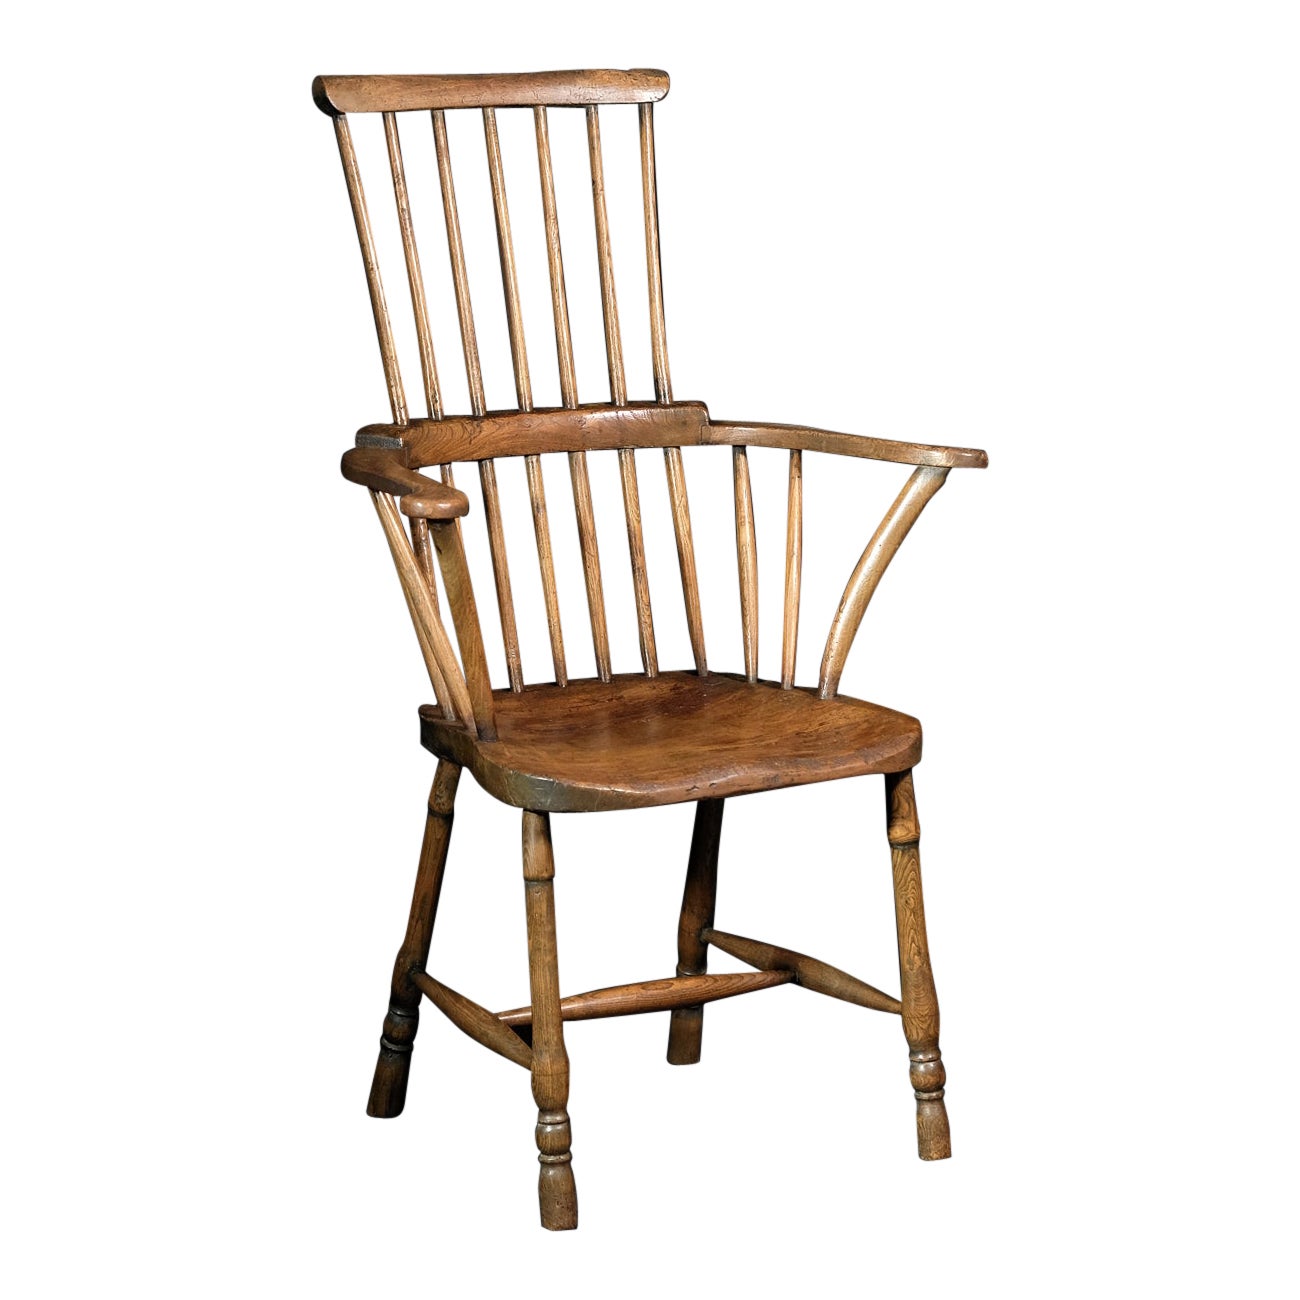 18th Century English West Country Comb Back Windsor Chair, Primitive Rustic, Elm